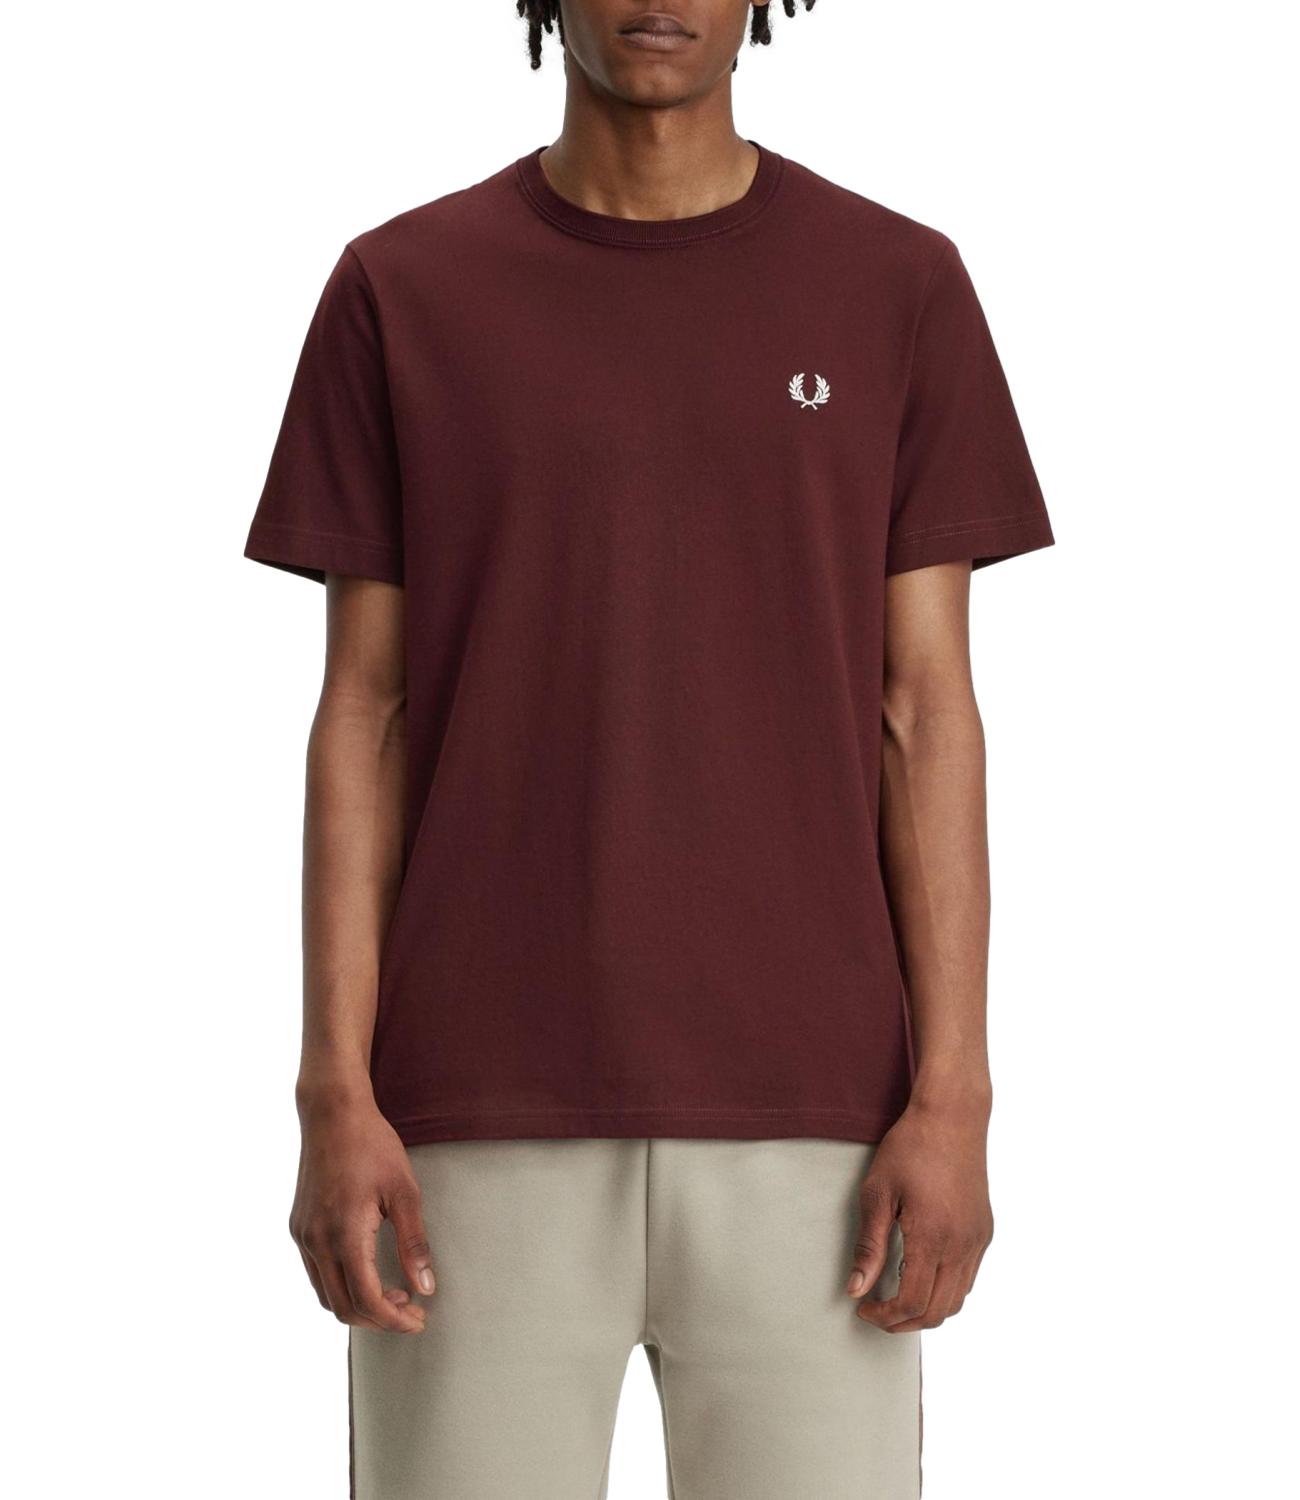 Fred Perry t-shirt bordeaux Crew neck